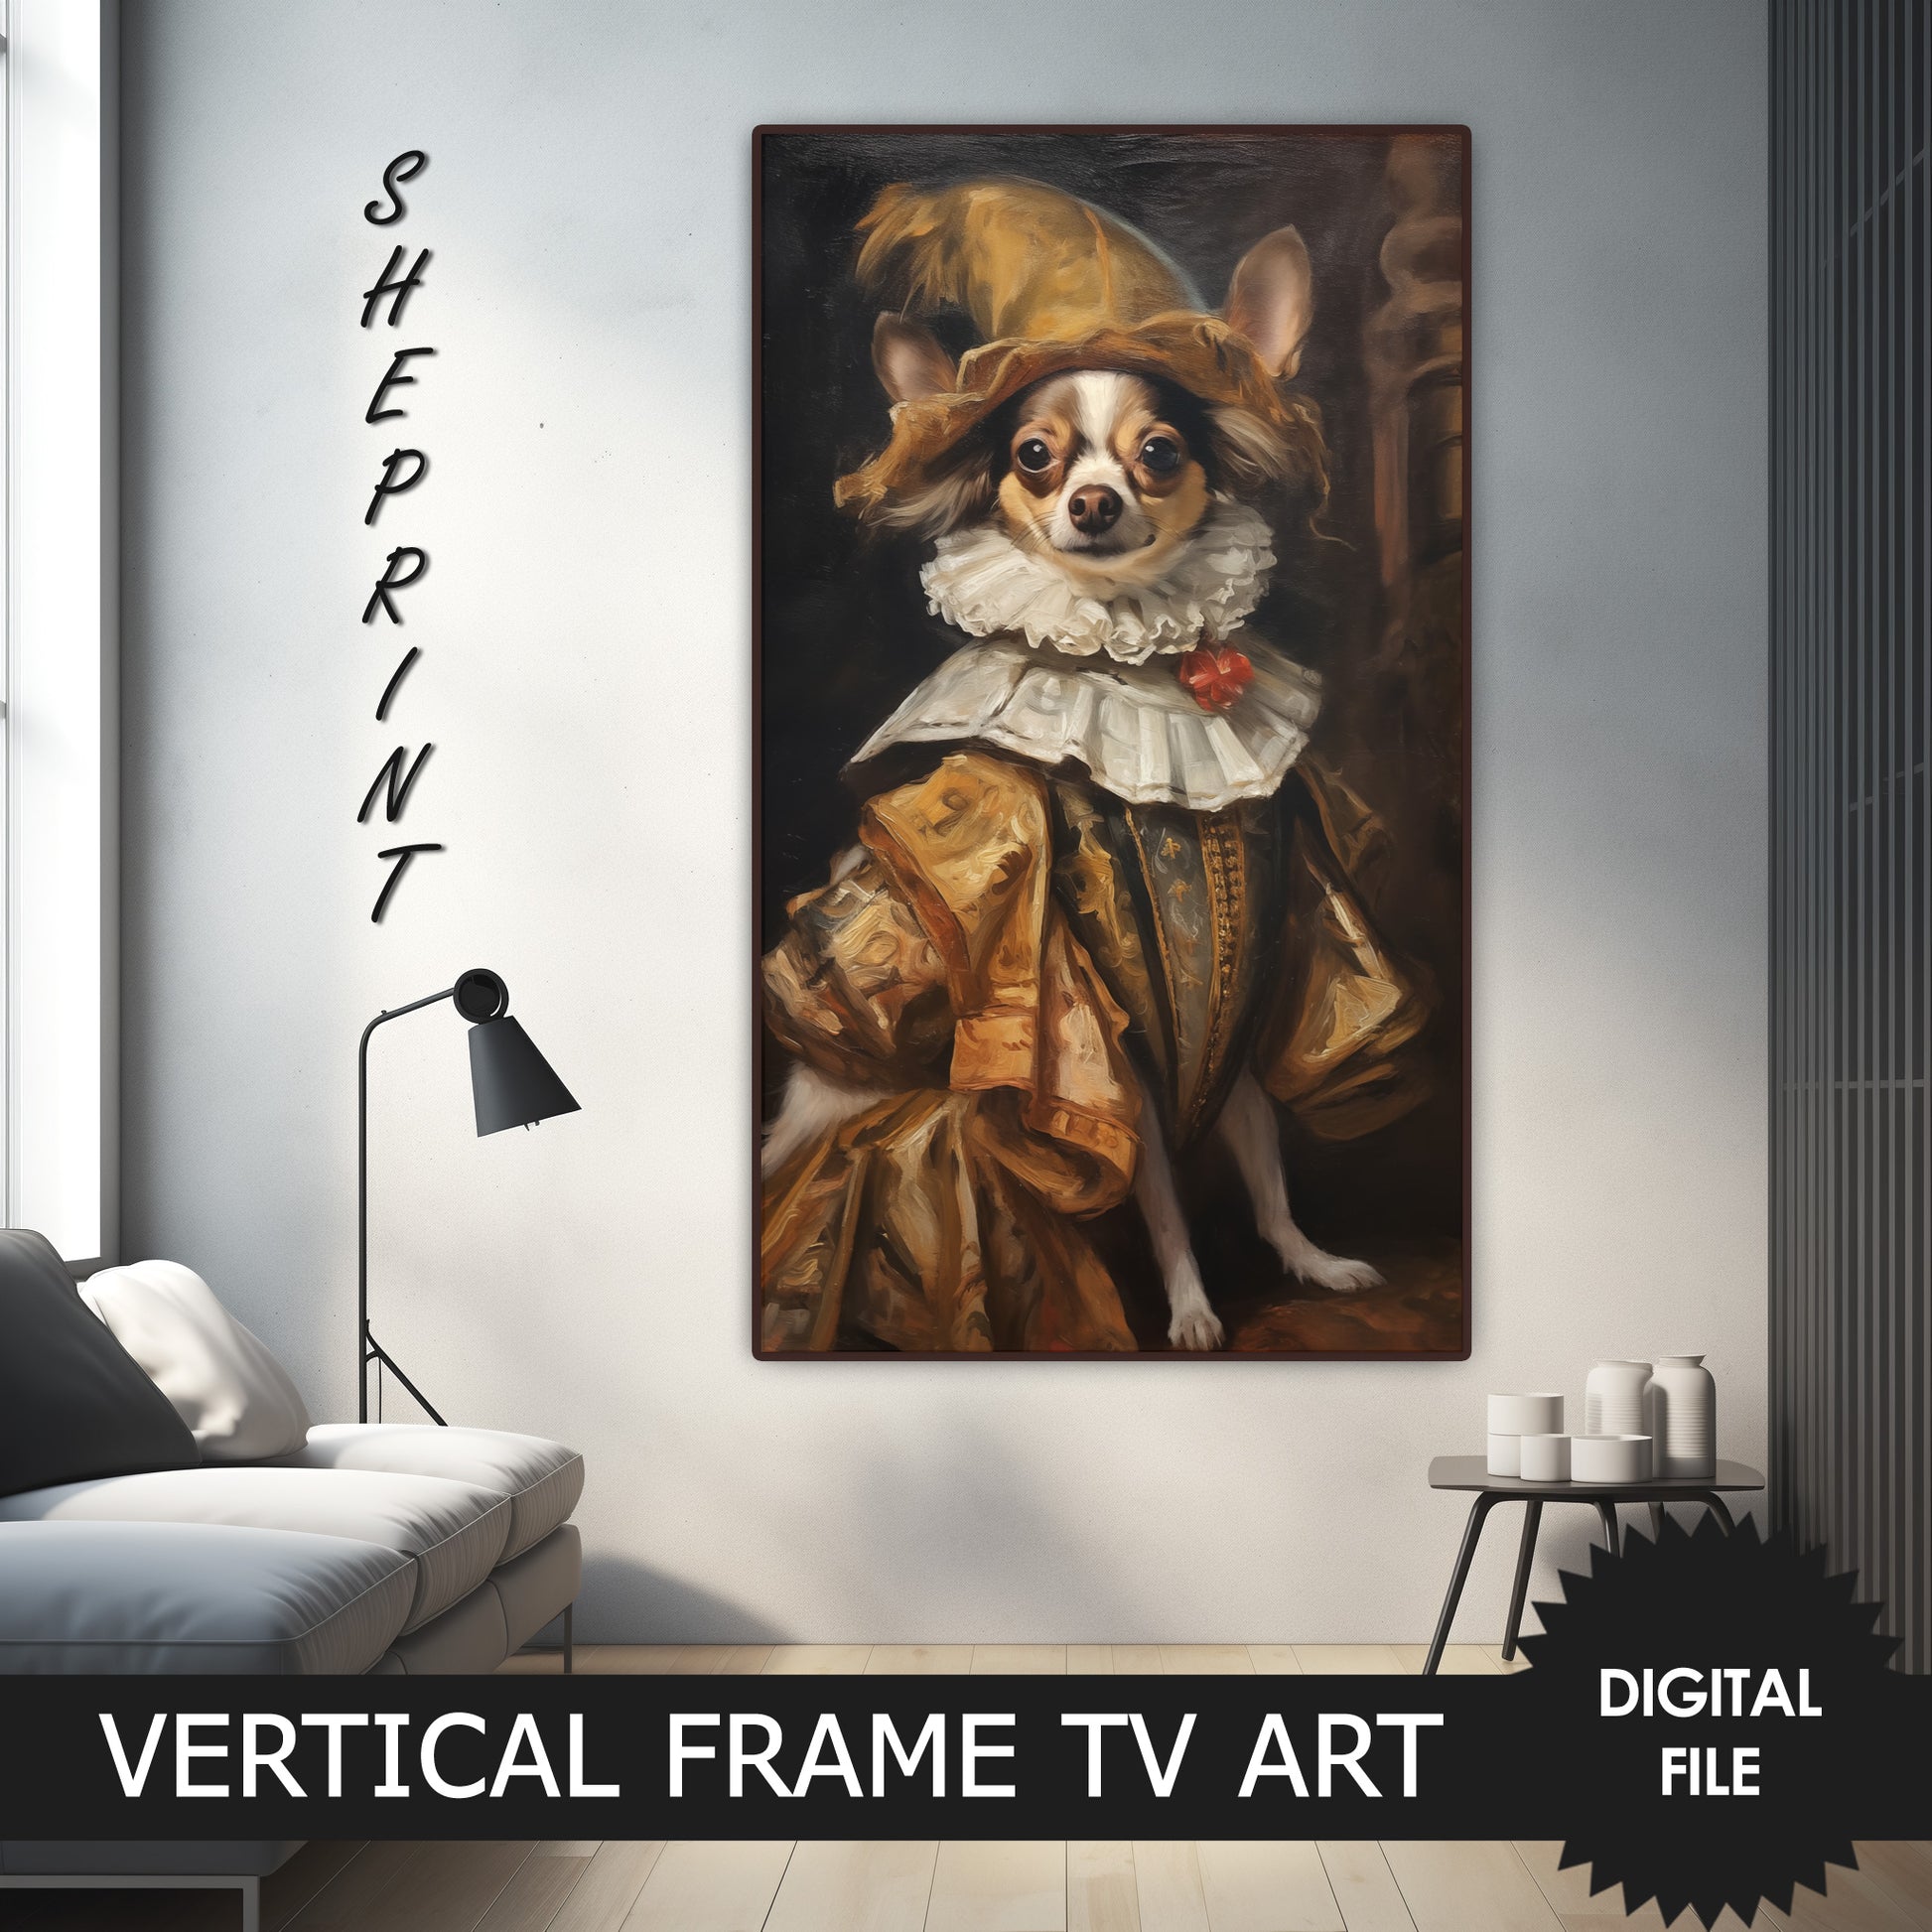 Vertical Frame TV Art | Chocolate White Chihuahua Dressed Up Like A King preview on Samsung frame tv when mounted vertically